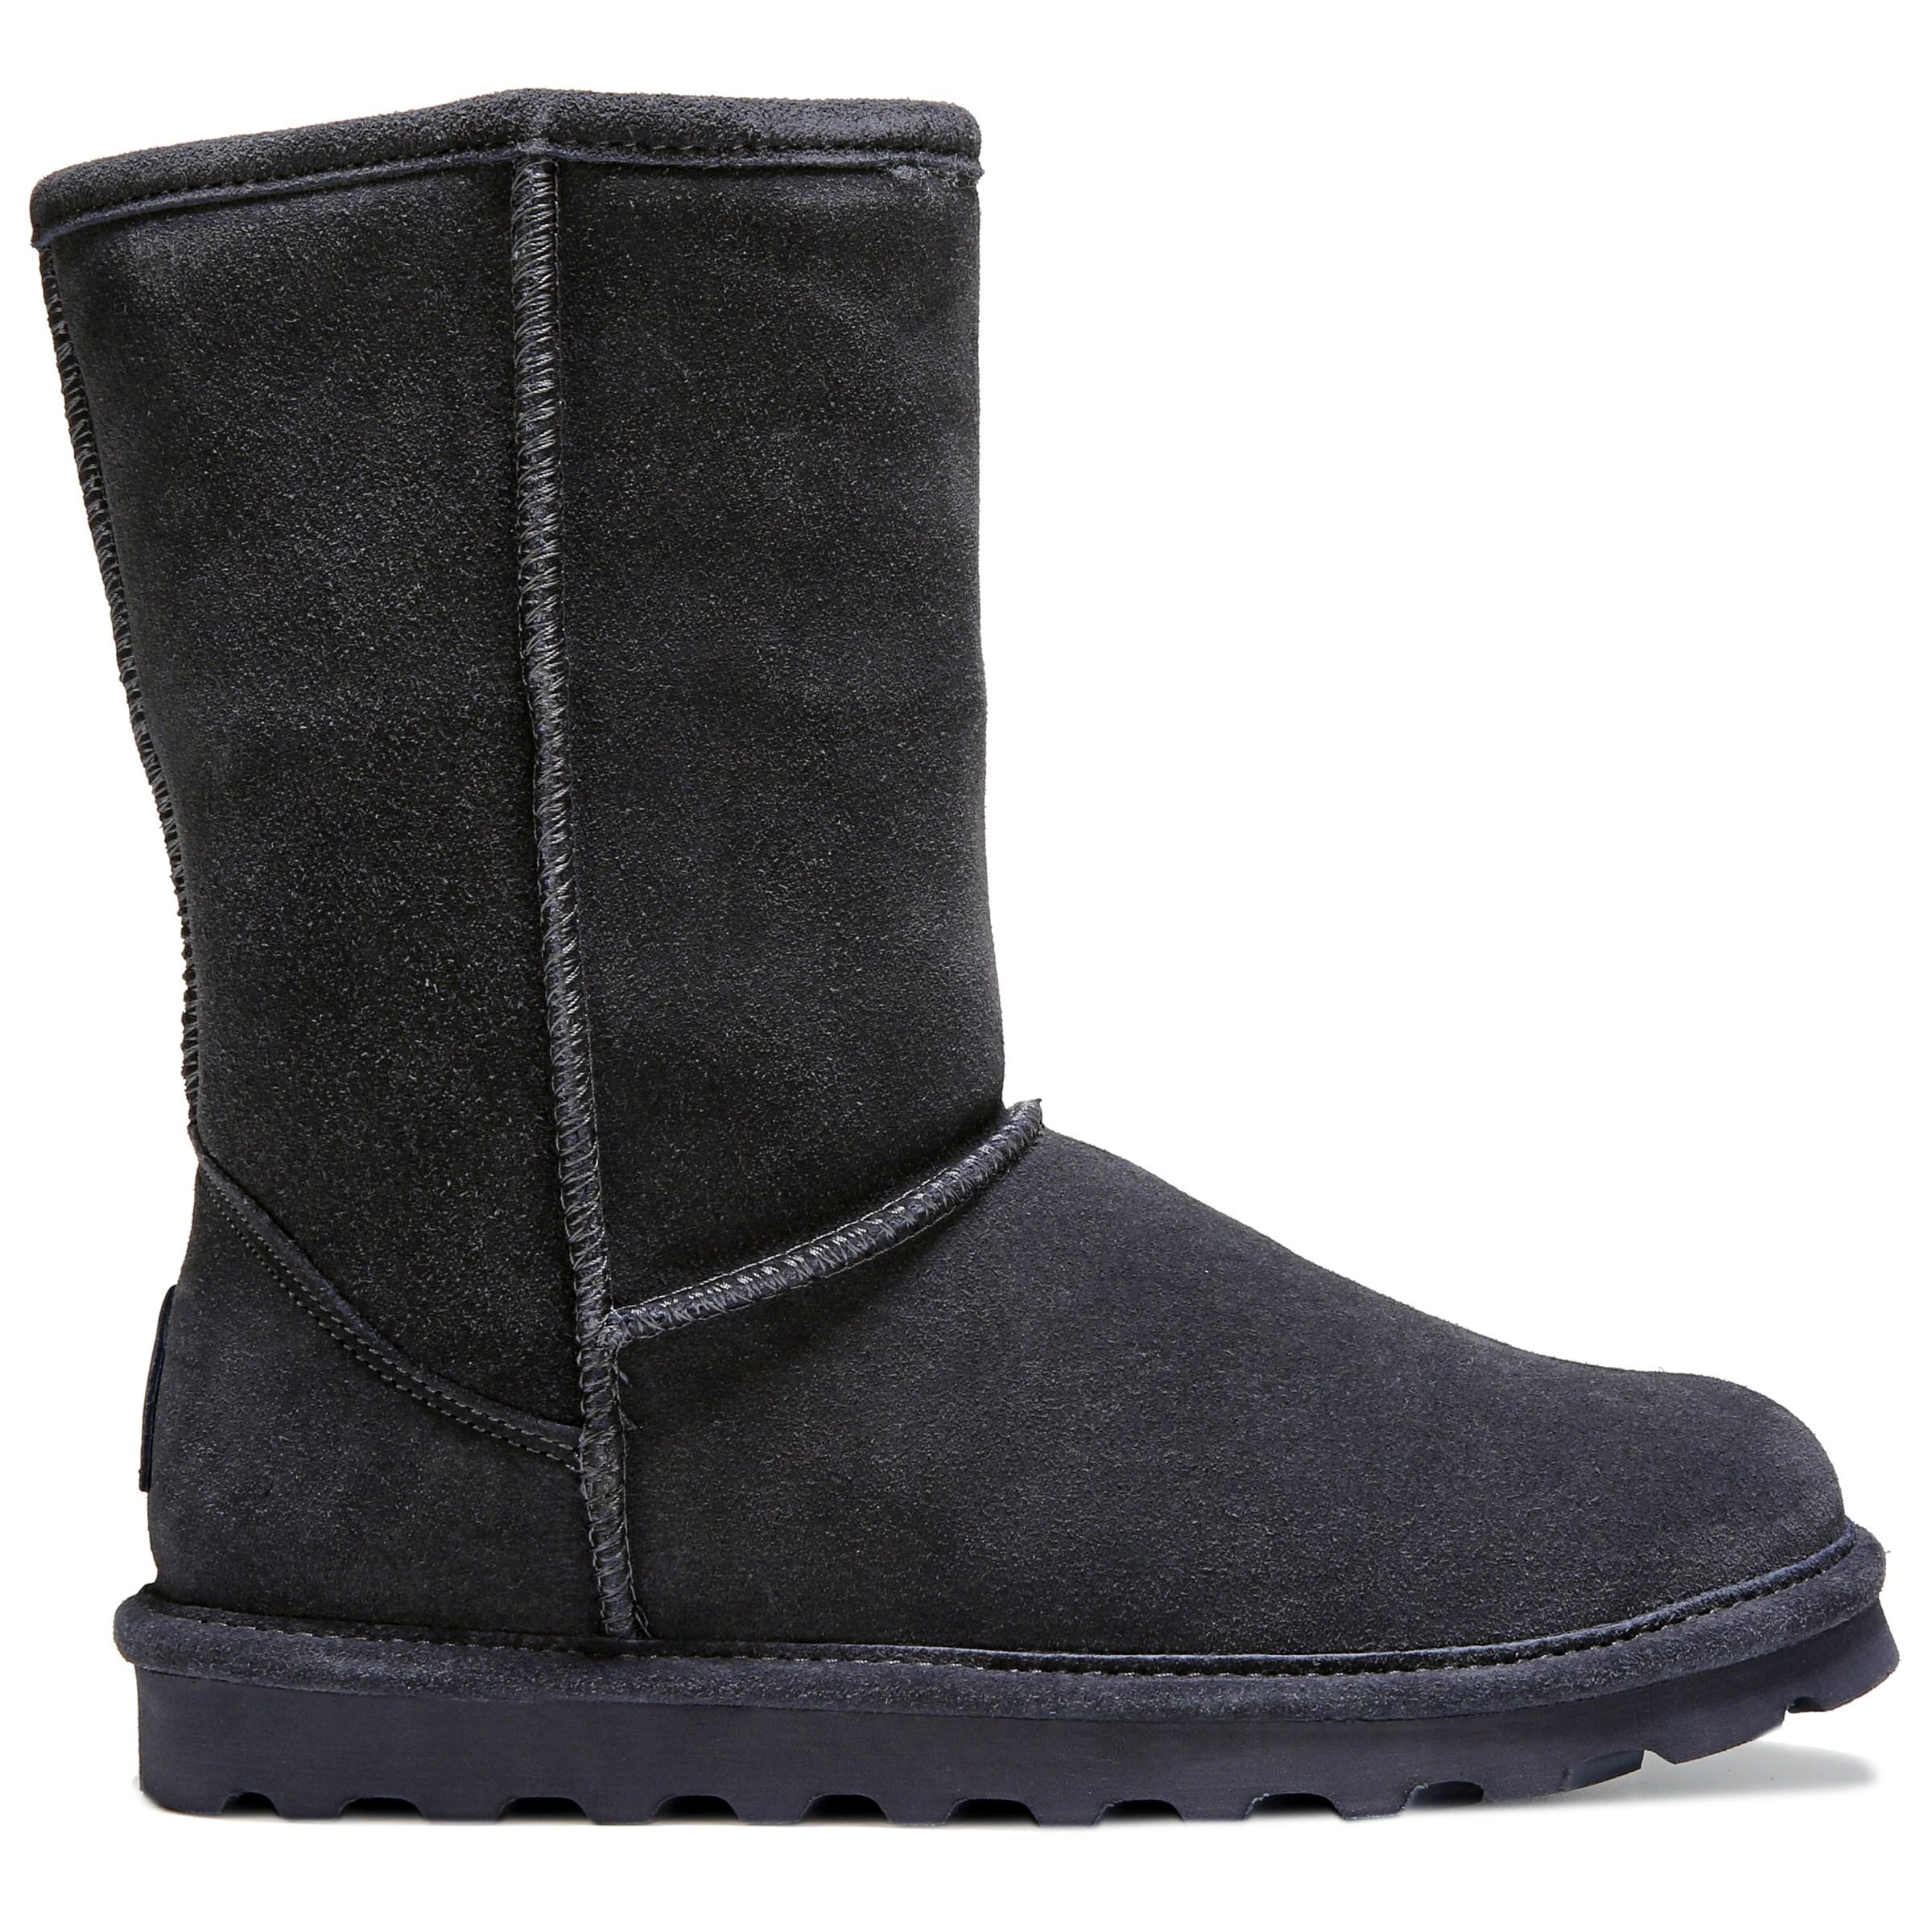 BEARPAW Suede Elle Short Water Resistant Winter Boots in Charcoal (Gray ...